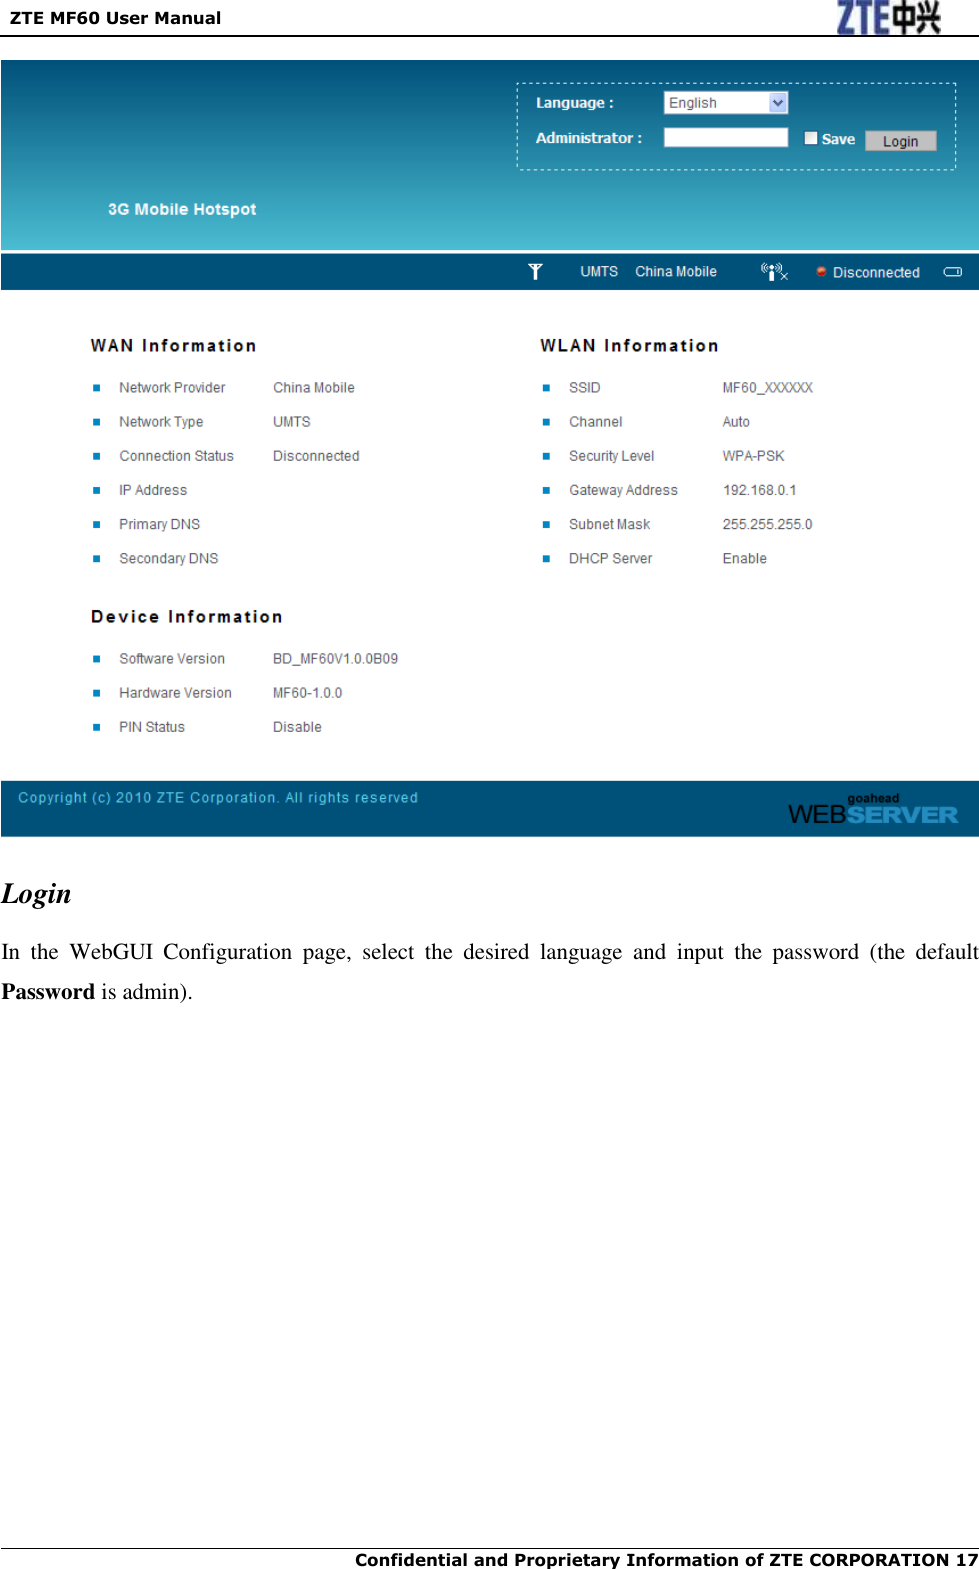   ZTE MF60 User Manual  Confidential and Proprietary Information of ZTE CORPORATION 17      Login In  the  WebGUI  Configuration  page,  select  the  desired  language  and  input  the  password  (the  default Password is admin). 